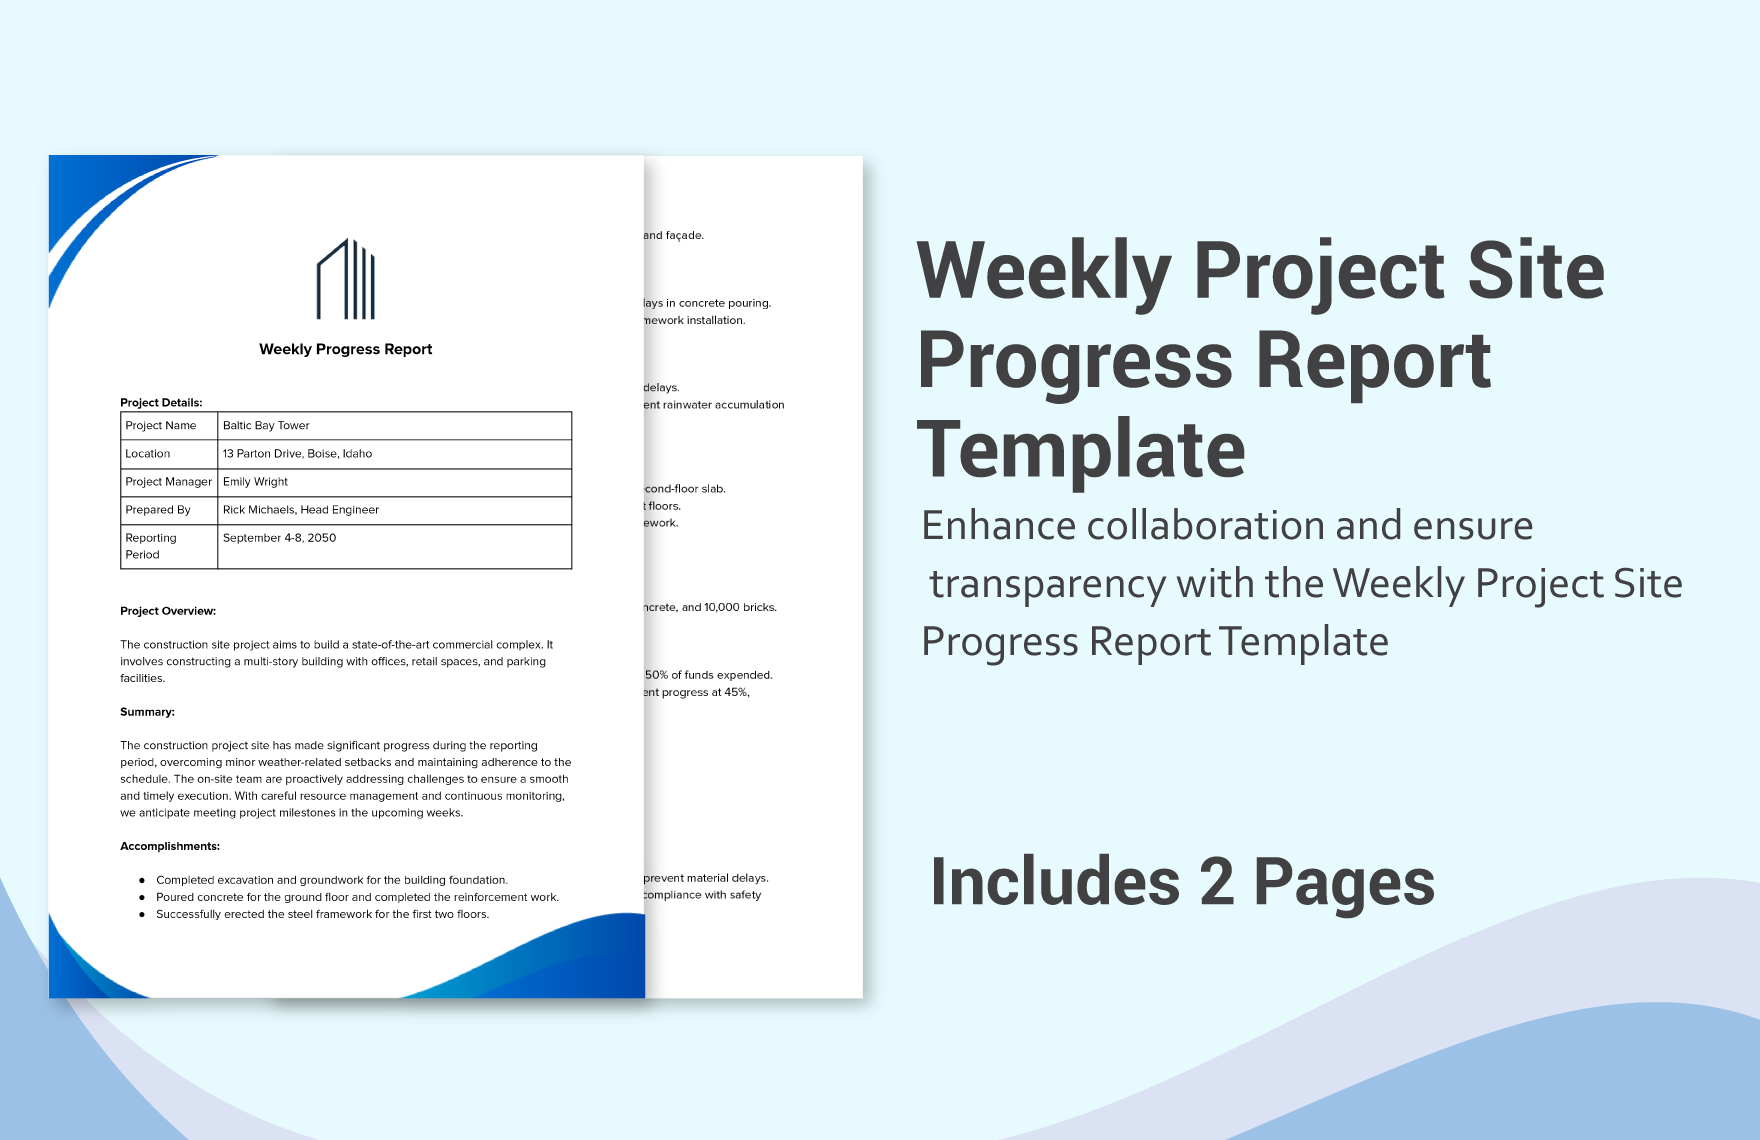 Weekly Project Site Progress Report Template